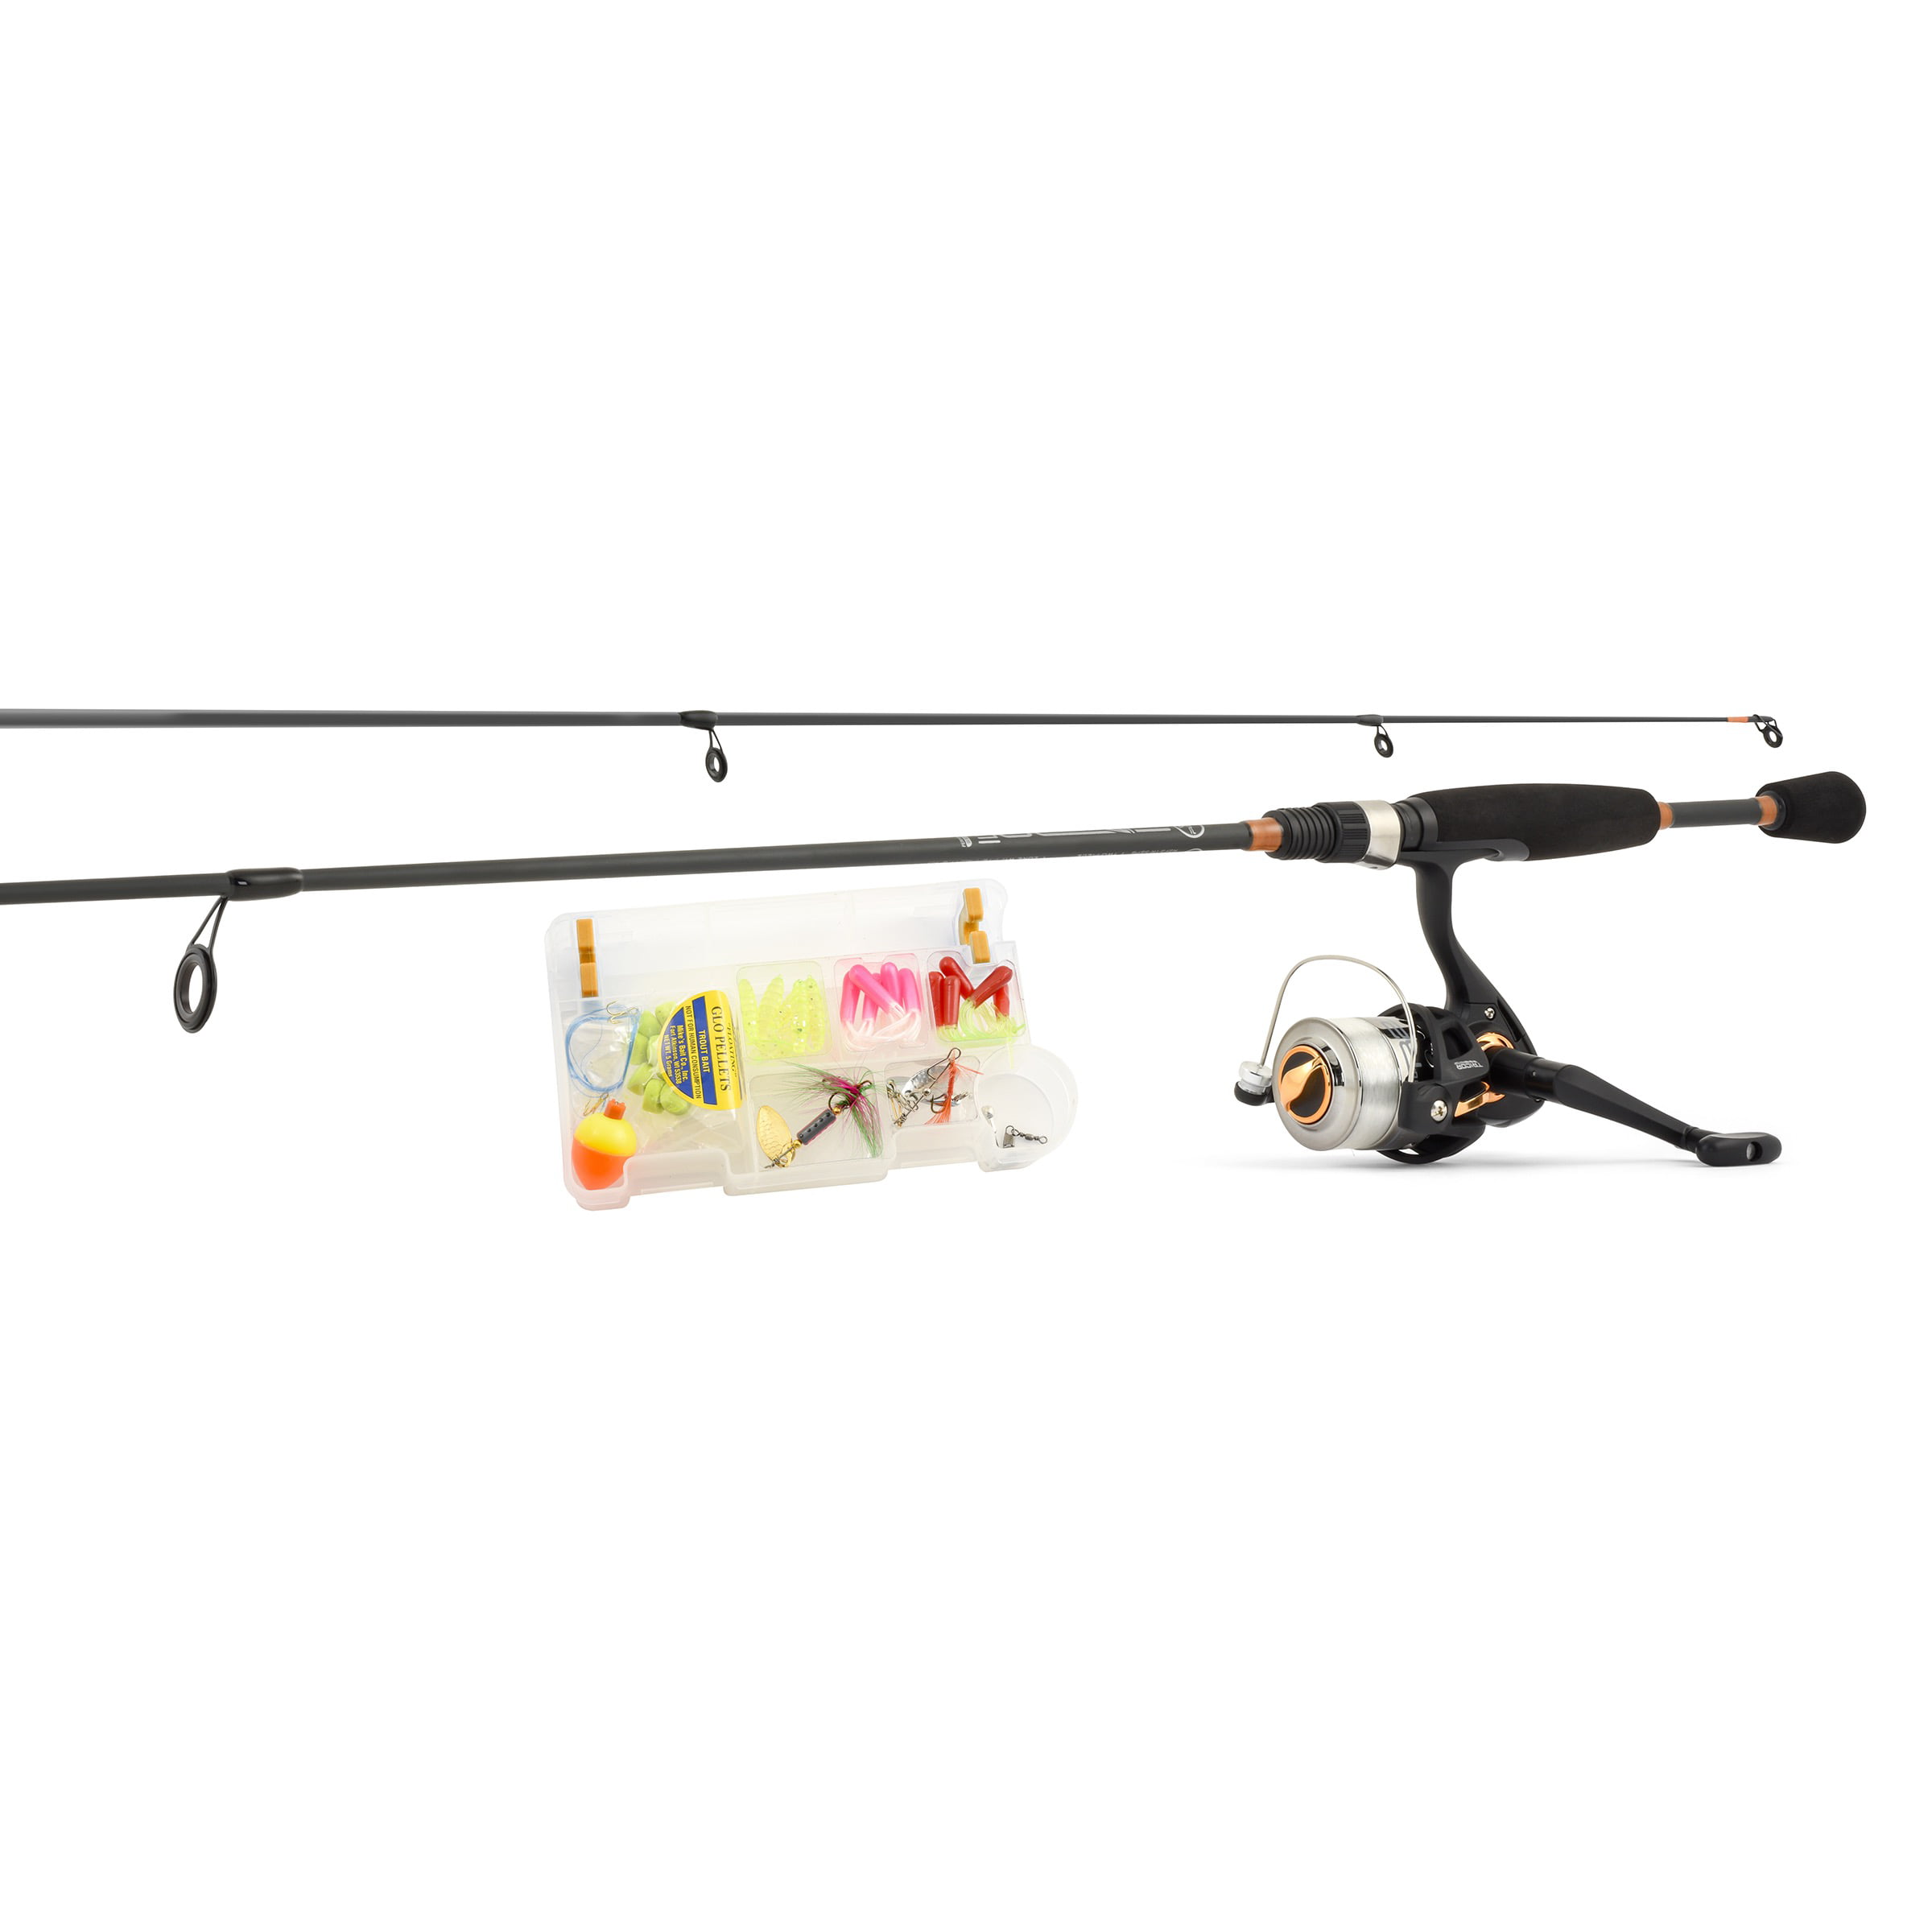 South Bend R2F Trout Spinning Fishing Rod & Reel Combo w/ Tackle Kit, 6'6